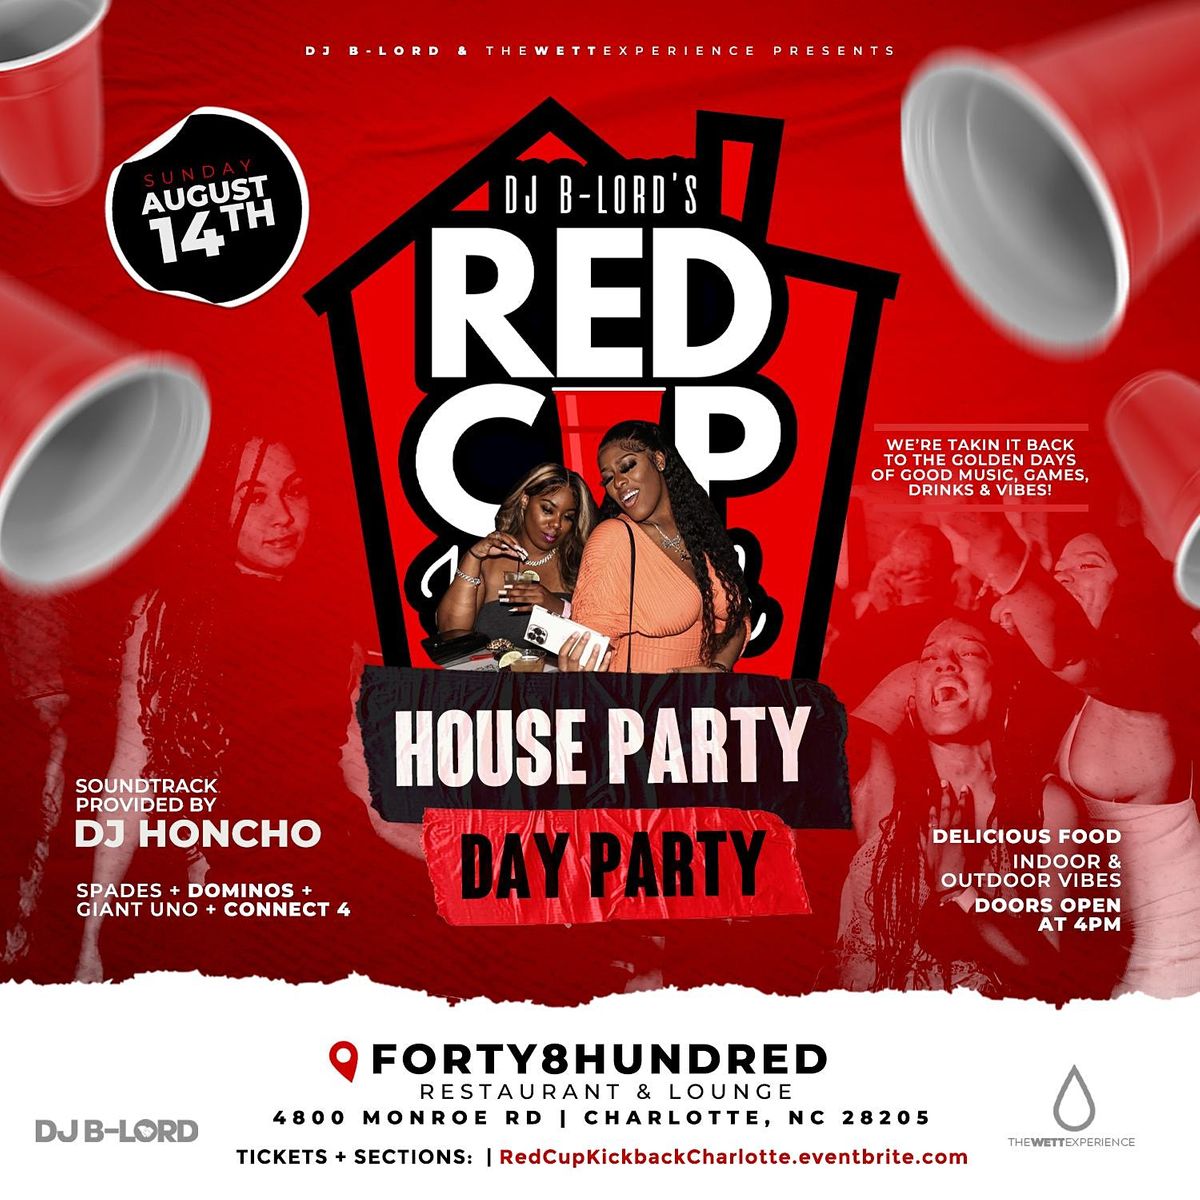 THE RED CUP KICKBACK - HOUSE PARTY + DAY PARTY!